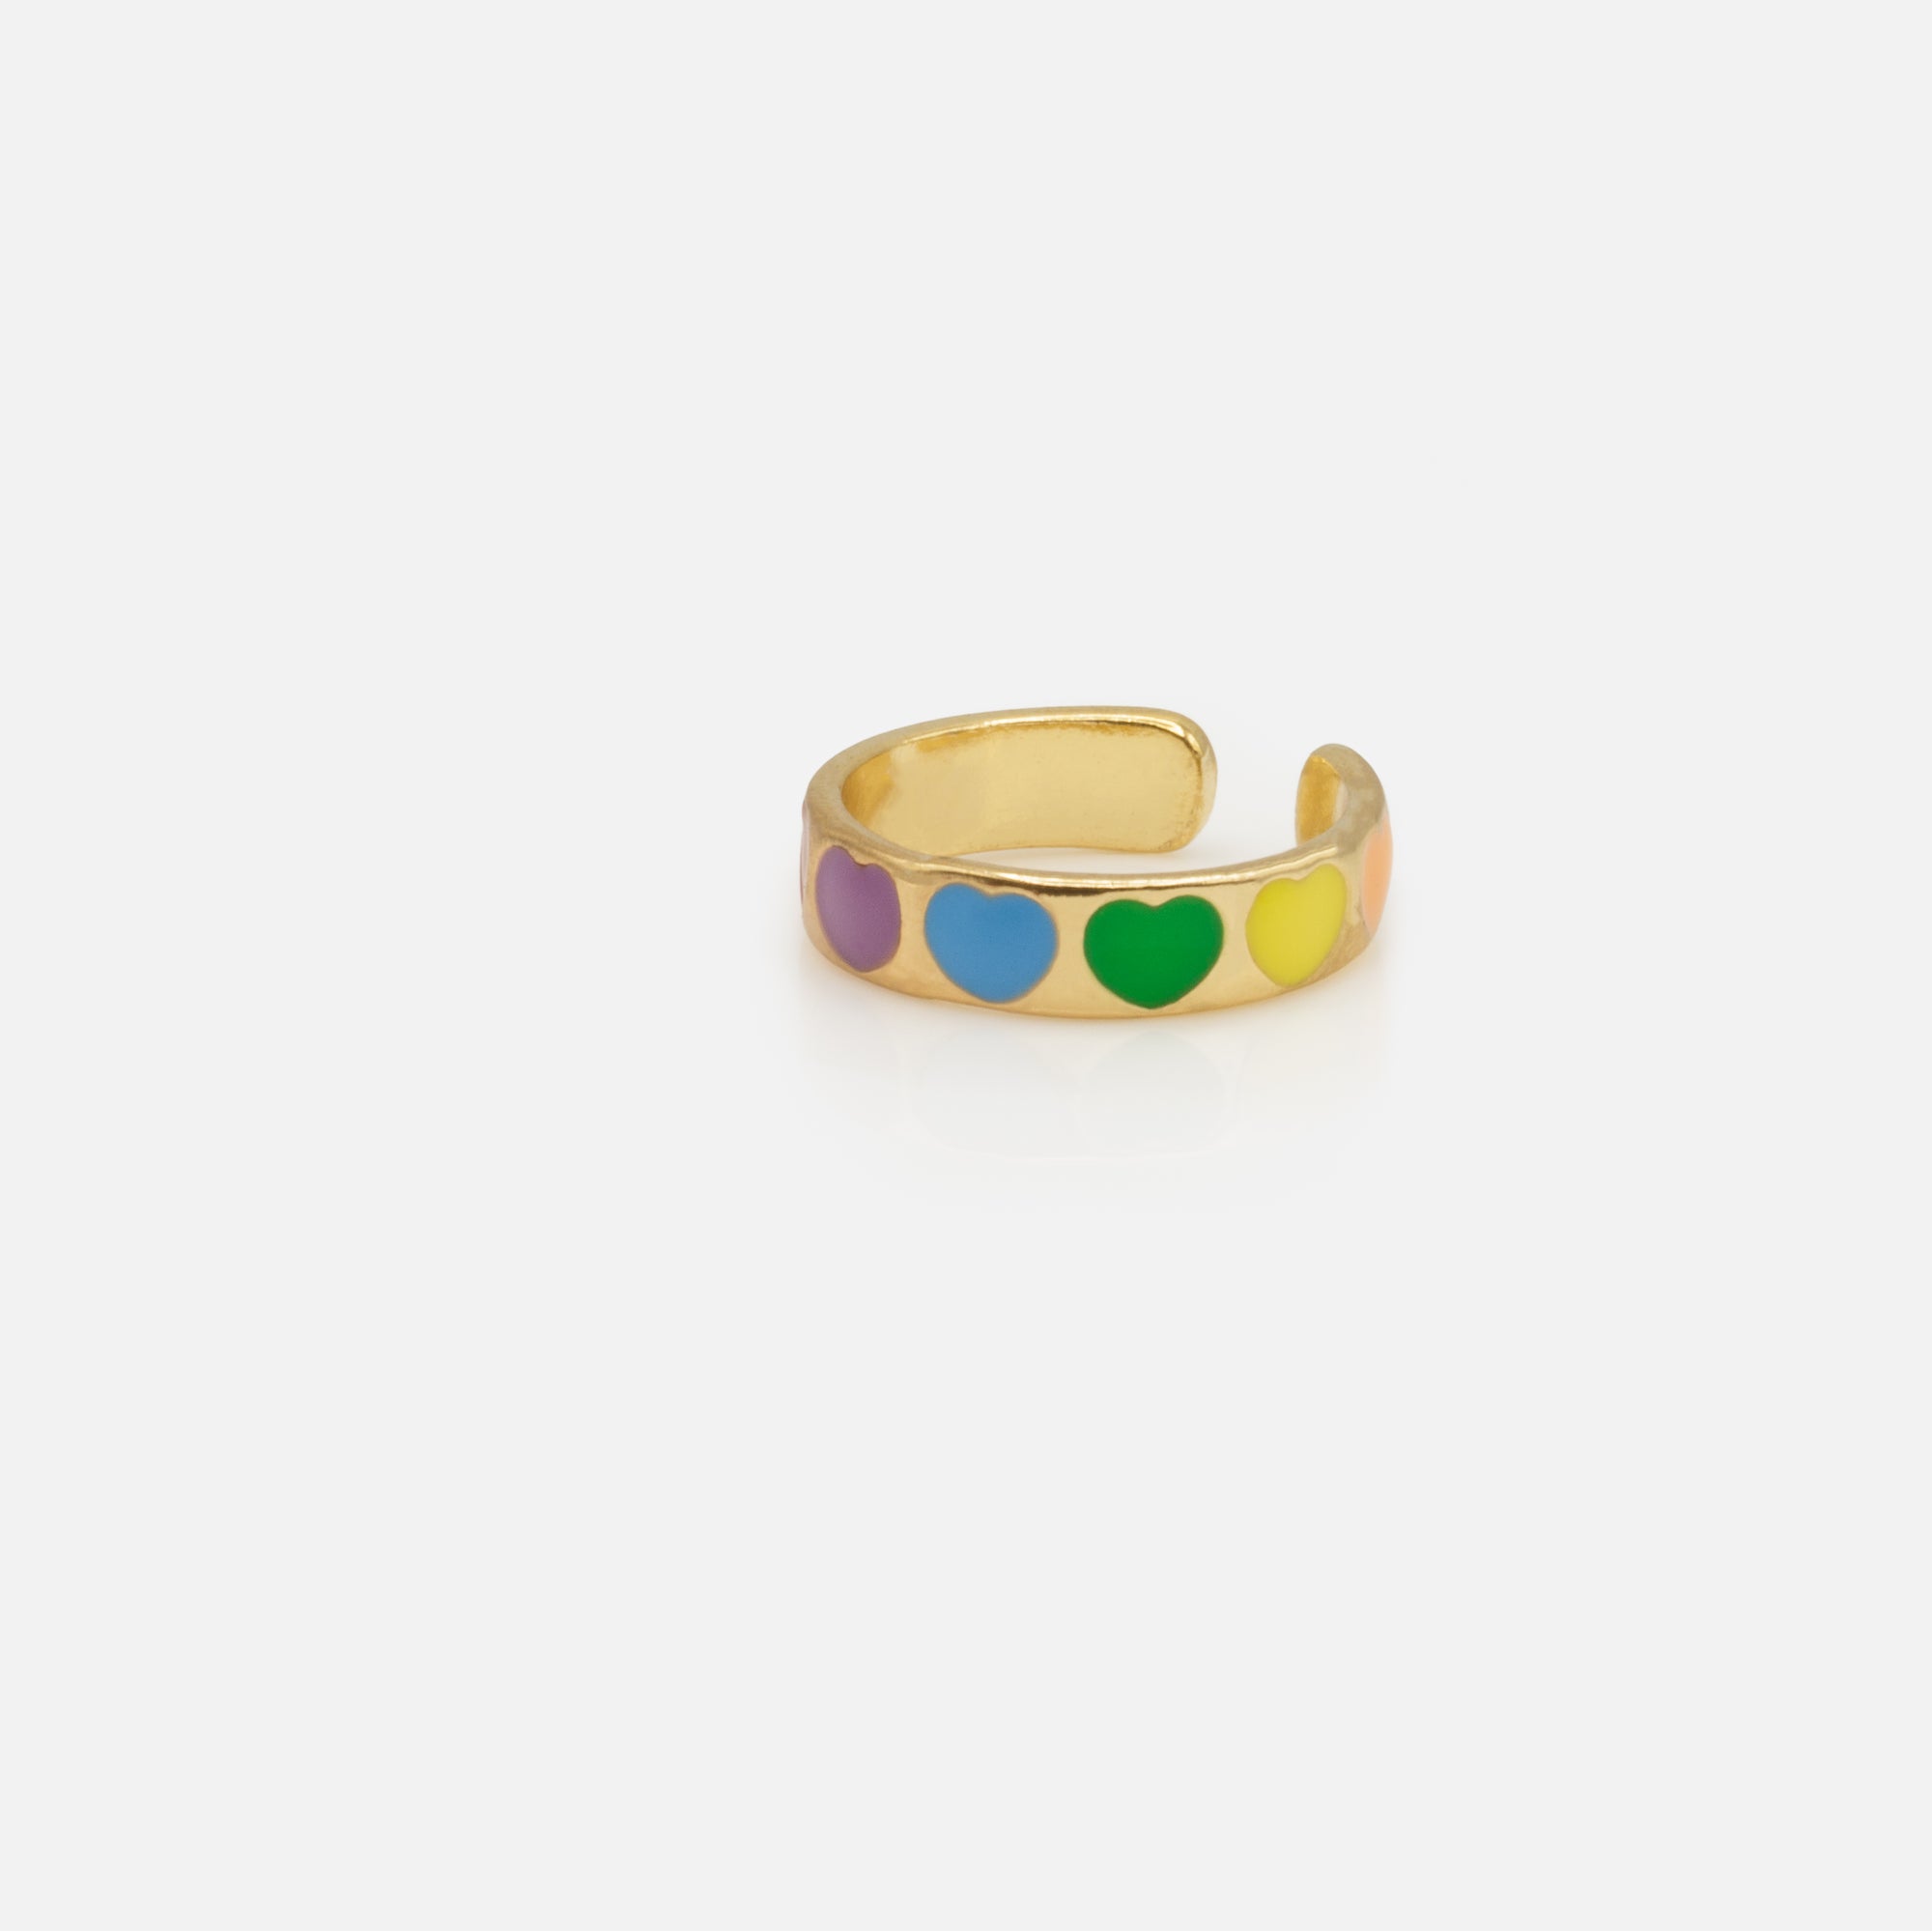 Golden open ring set with multicolored hearts and elastic ring with golden balls and pearls